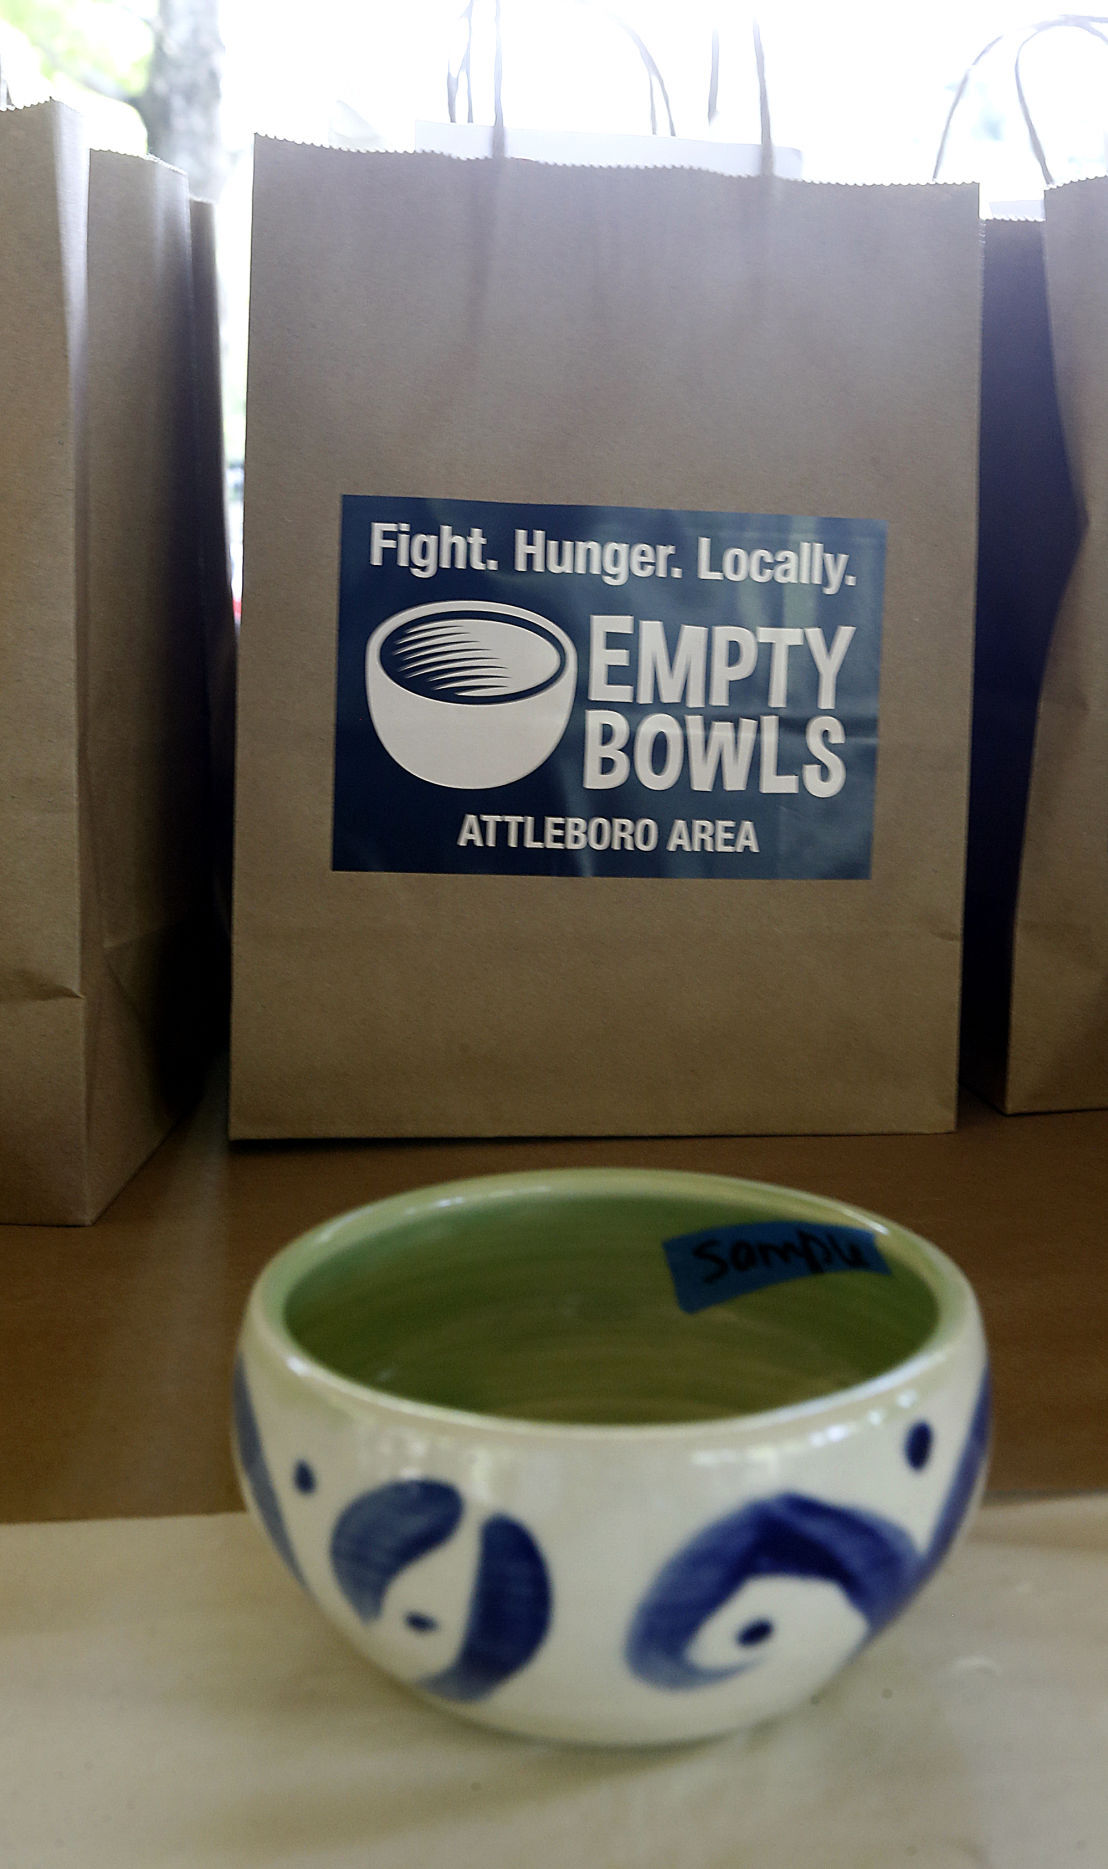 Empty Bowls raises over 100,000 to fight hunger in Attleboro area